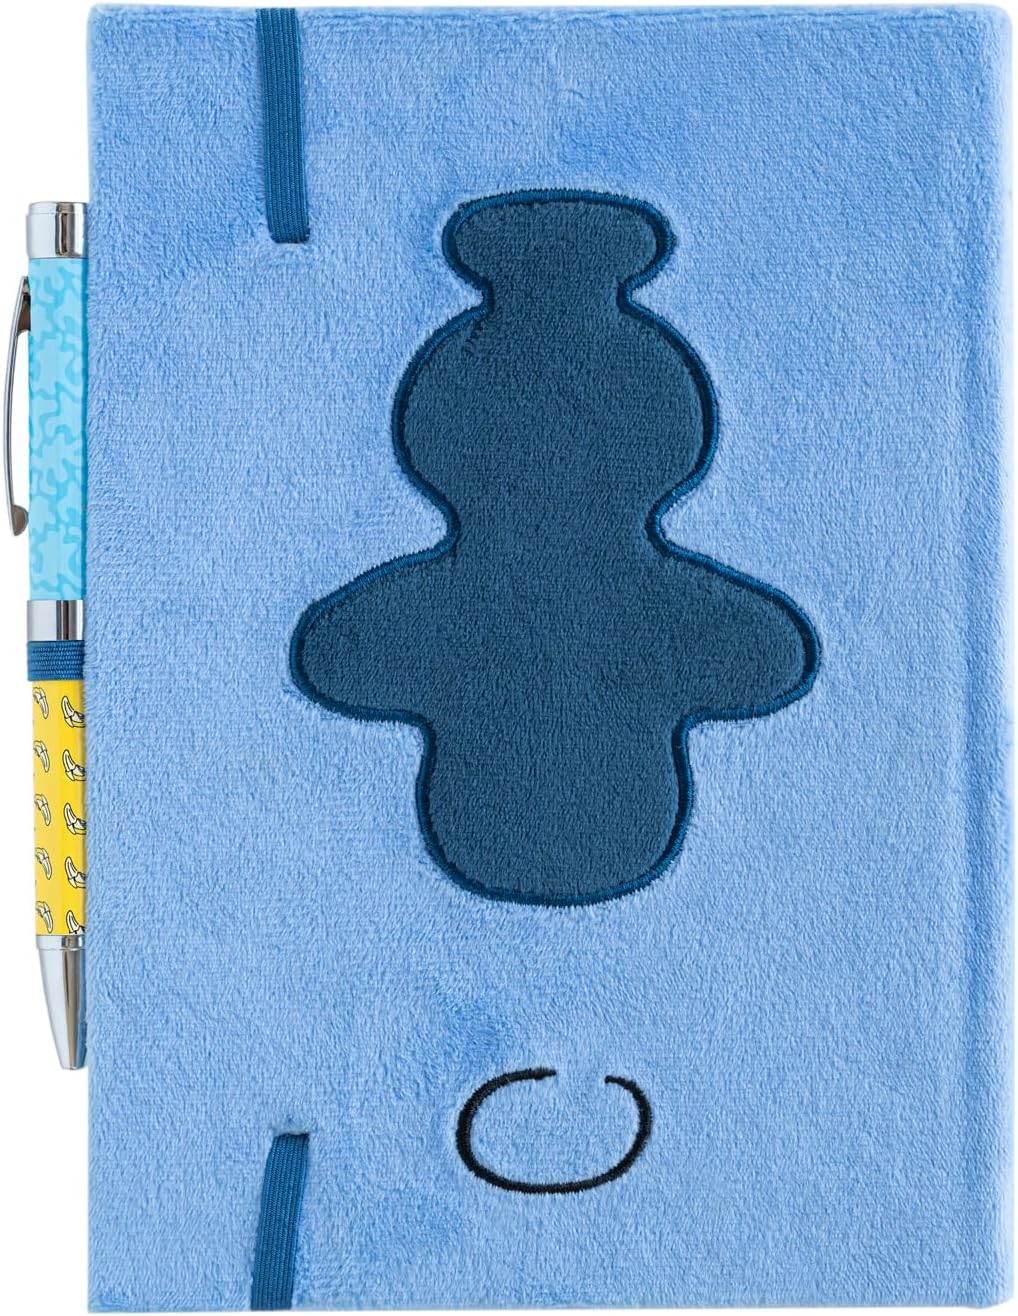 Grupo Erik Disney Stitch A5 Notebook Plush Cover With Projector Pen | Dotted Notebook